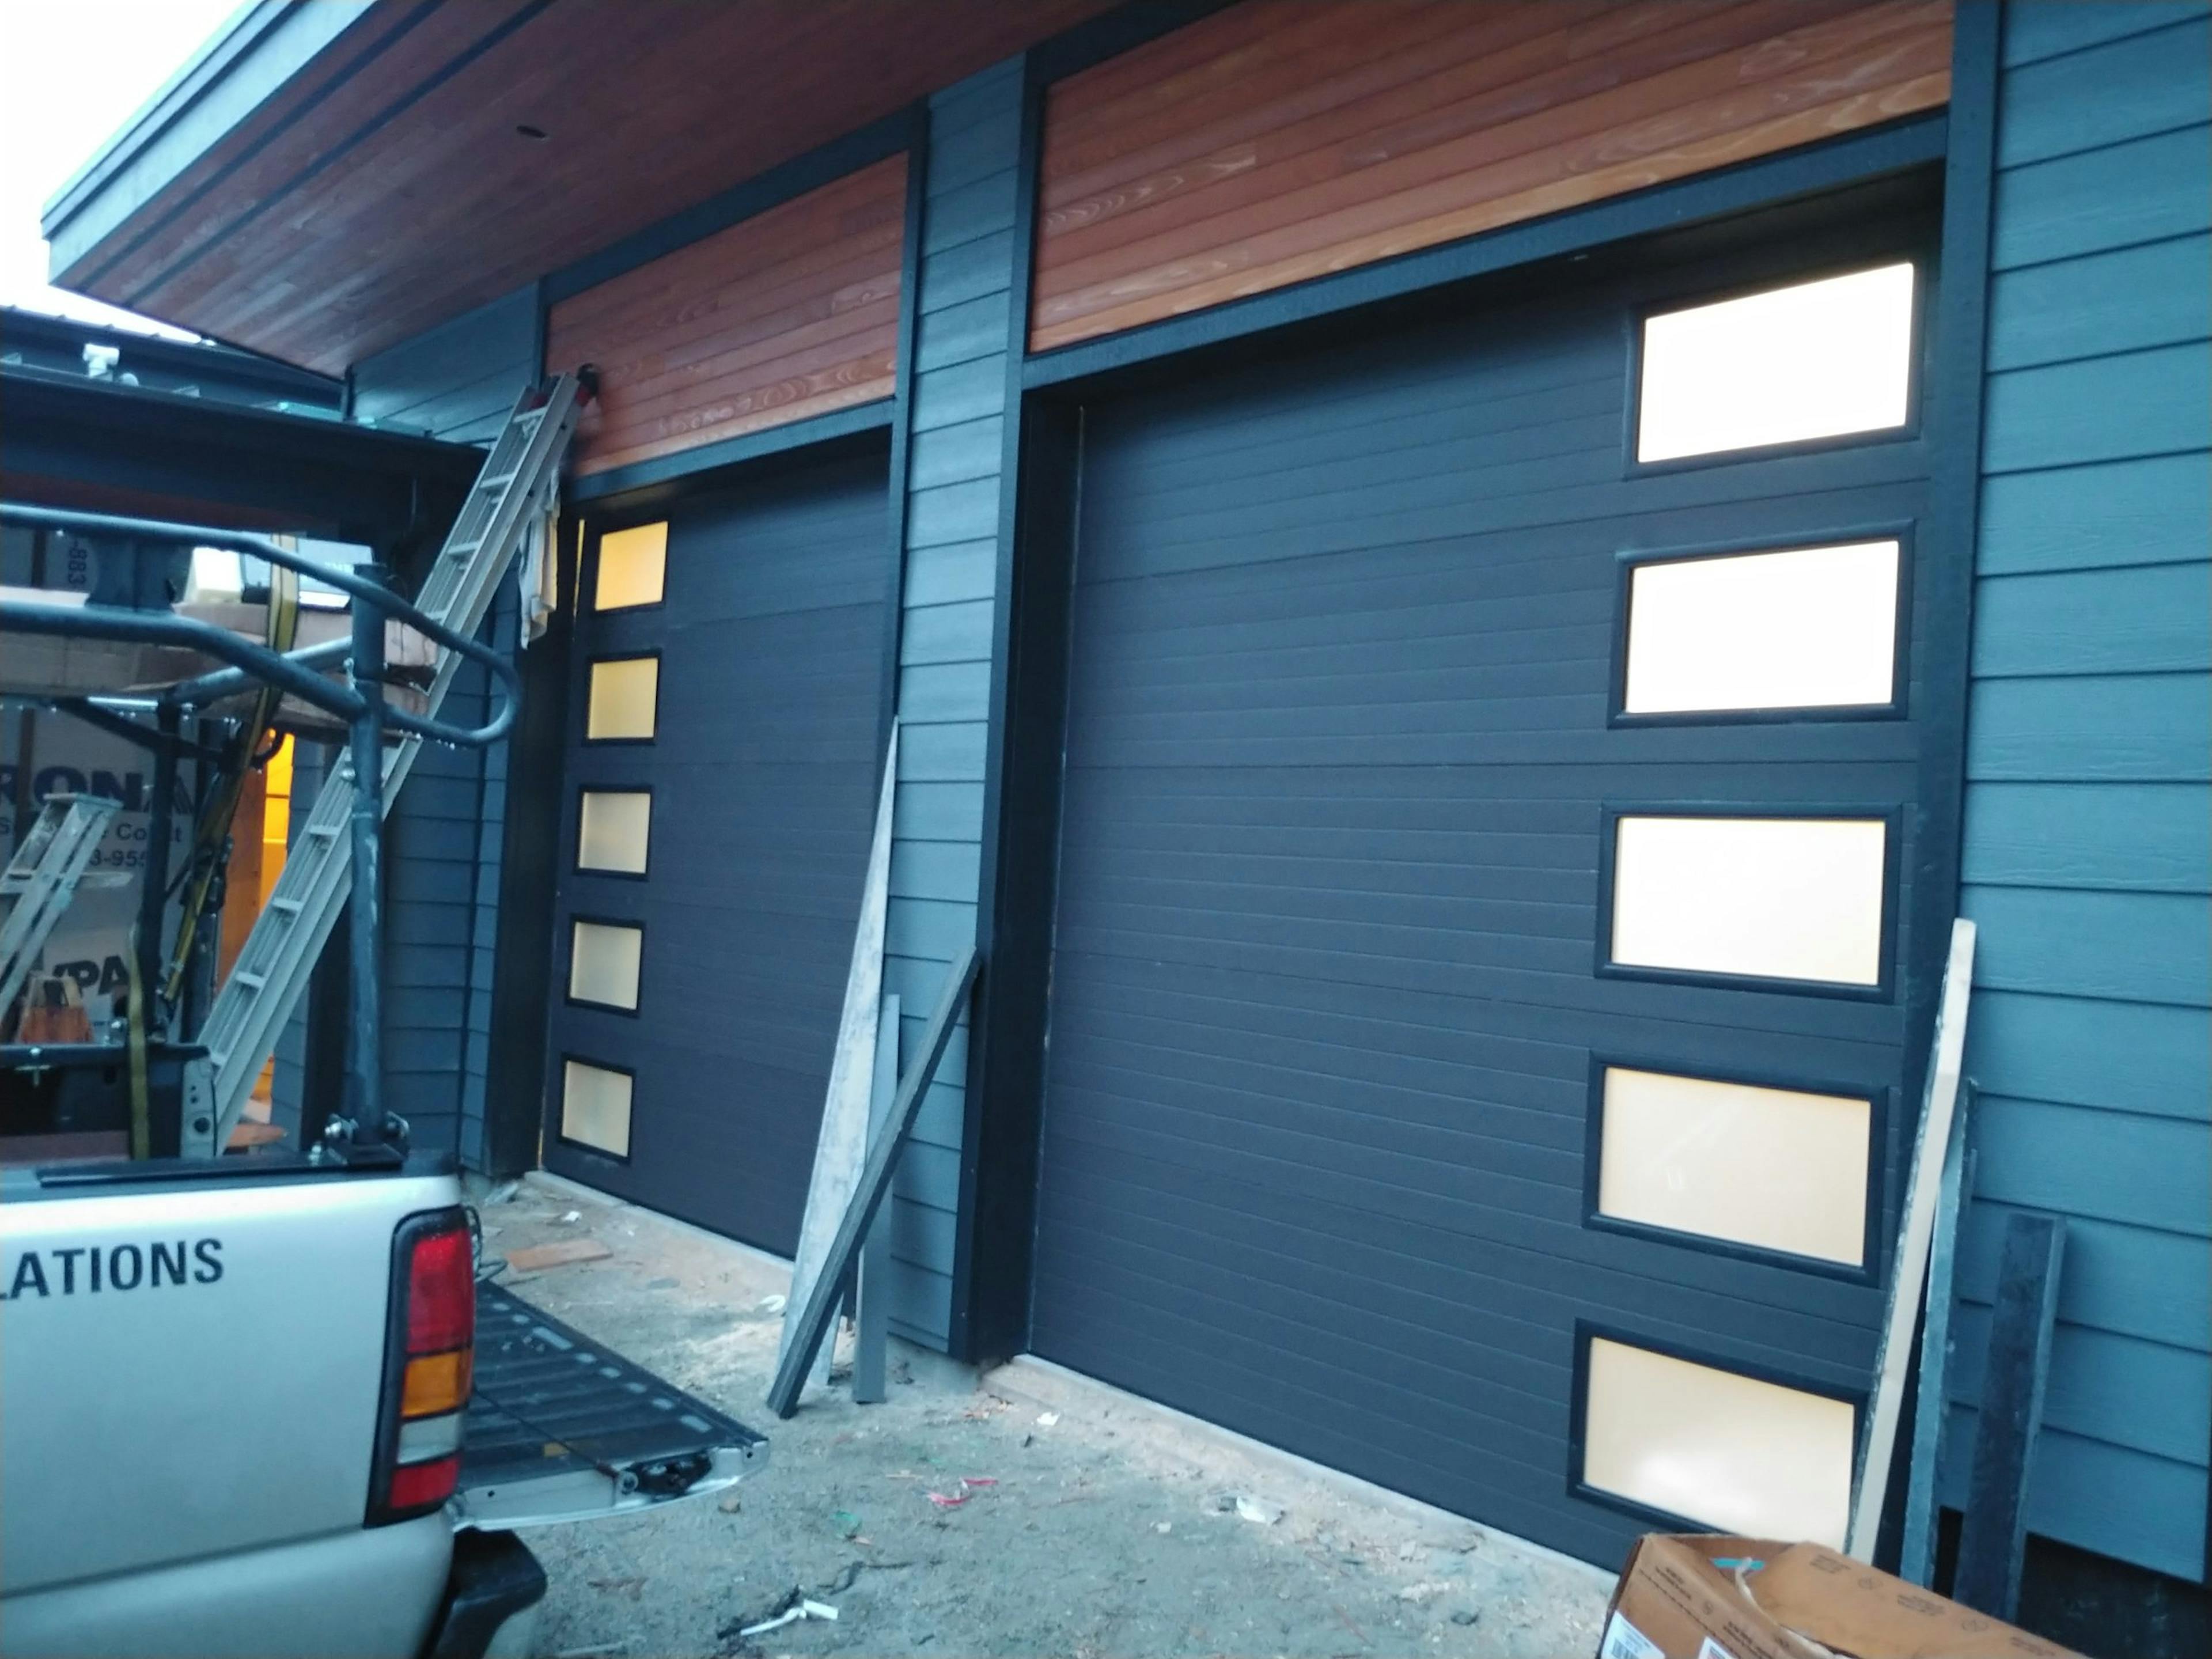 Matching dark garage doors with glass panels on the sides